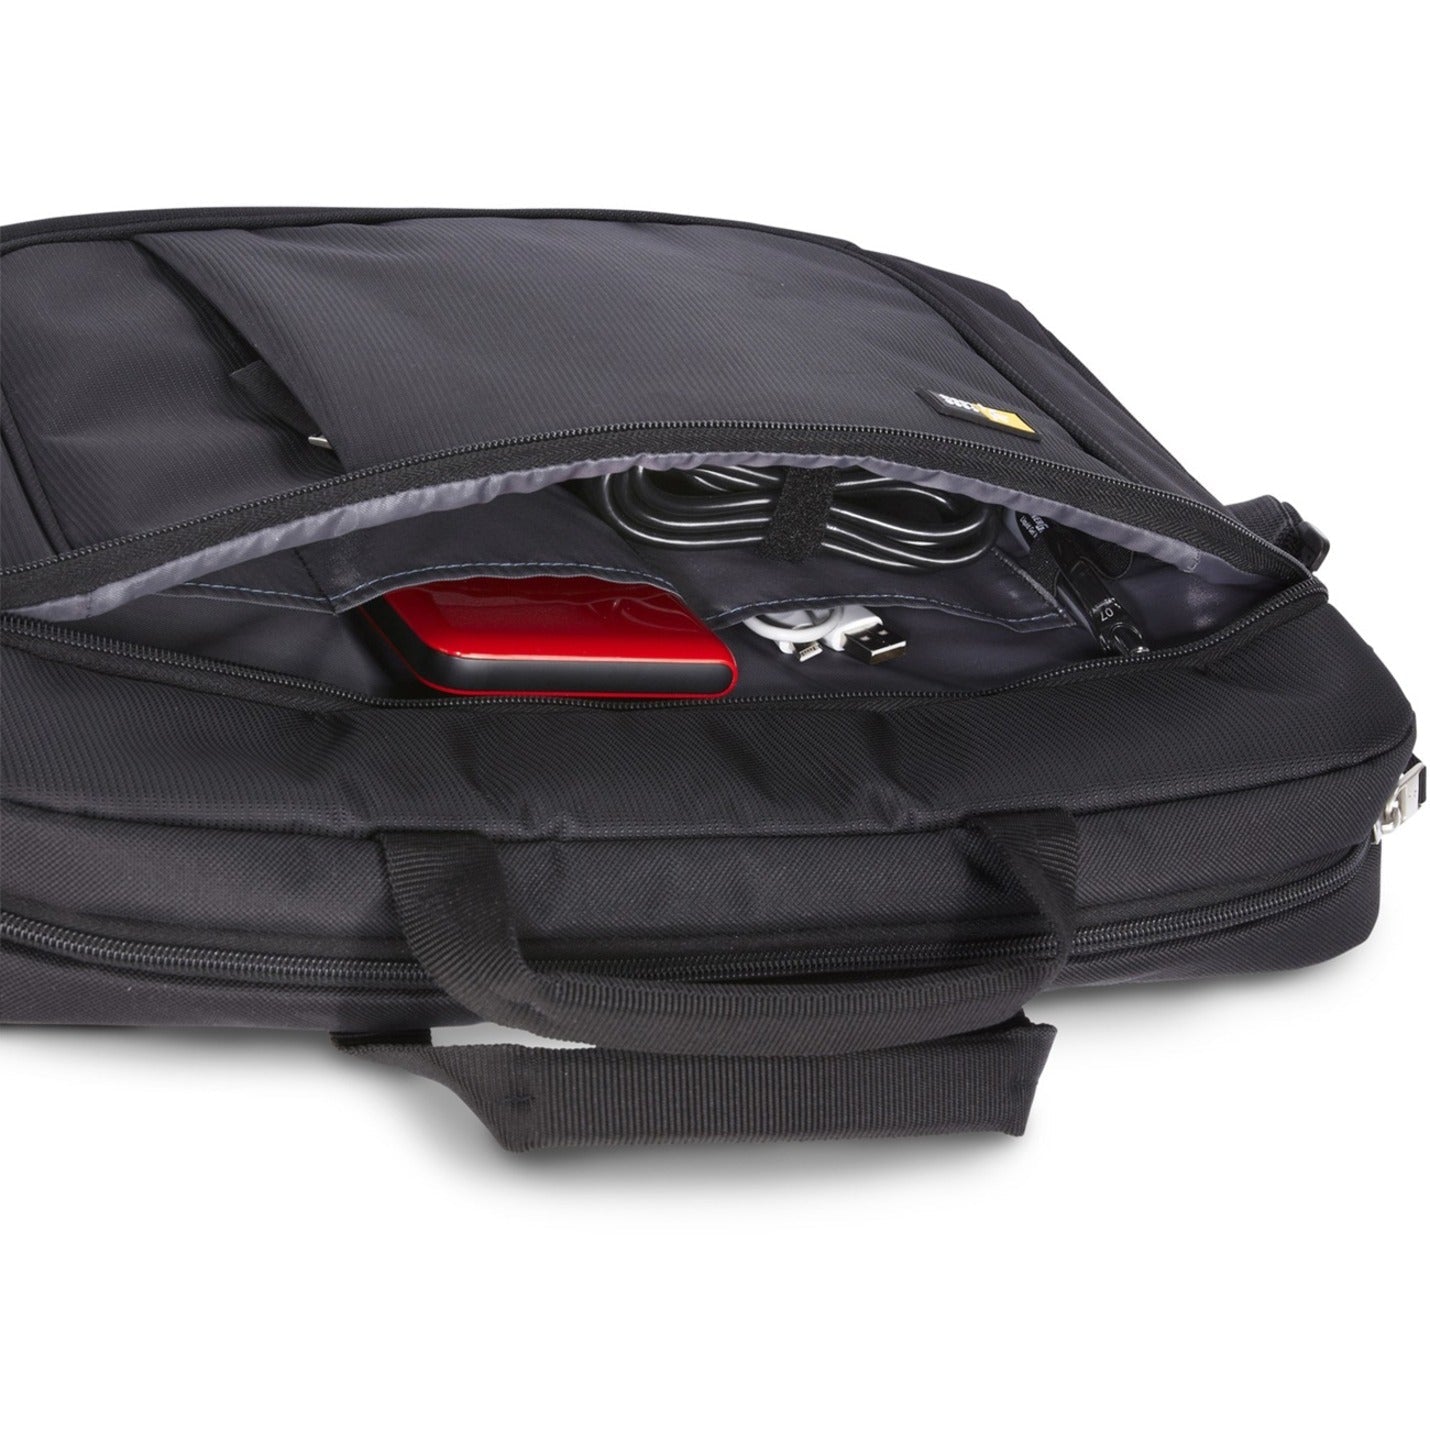 Case Logic AUA-314 Carrying Case for 14.1" Apple iPad Notebook - Black